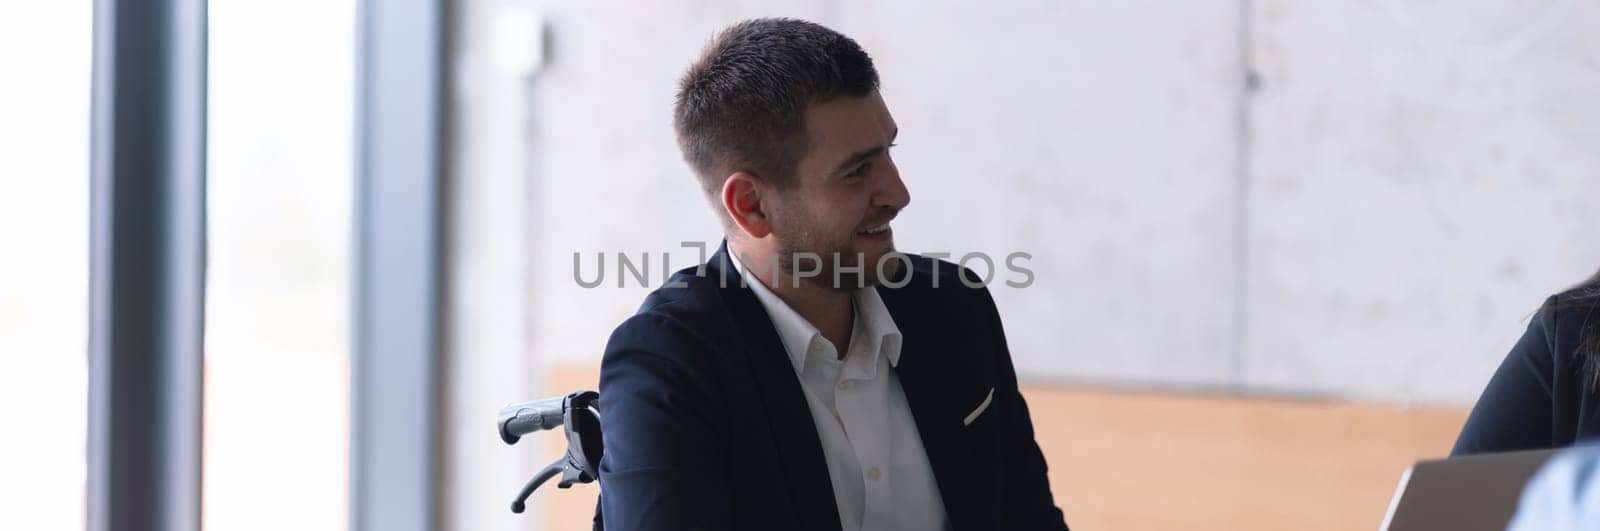 Wide crop photo of wheelchair bound businessman confidently leads a business meeting in a large, modern office, exemplifying inclusive leadership, effective communication, and the power of diversity in driving success and achieving impactful results. by dotshock